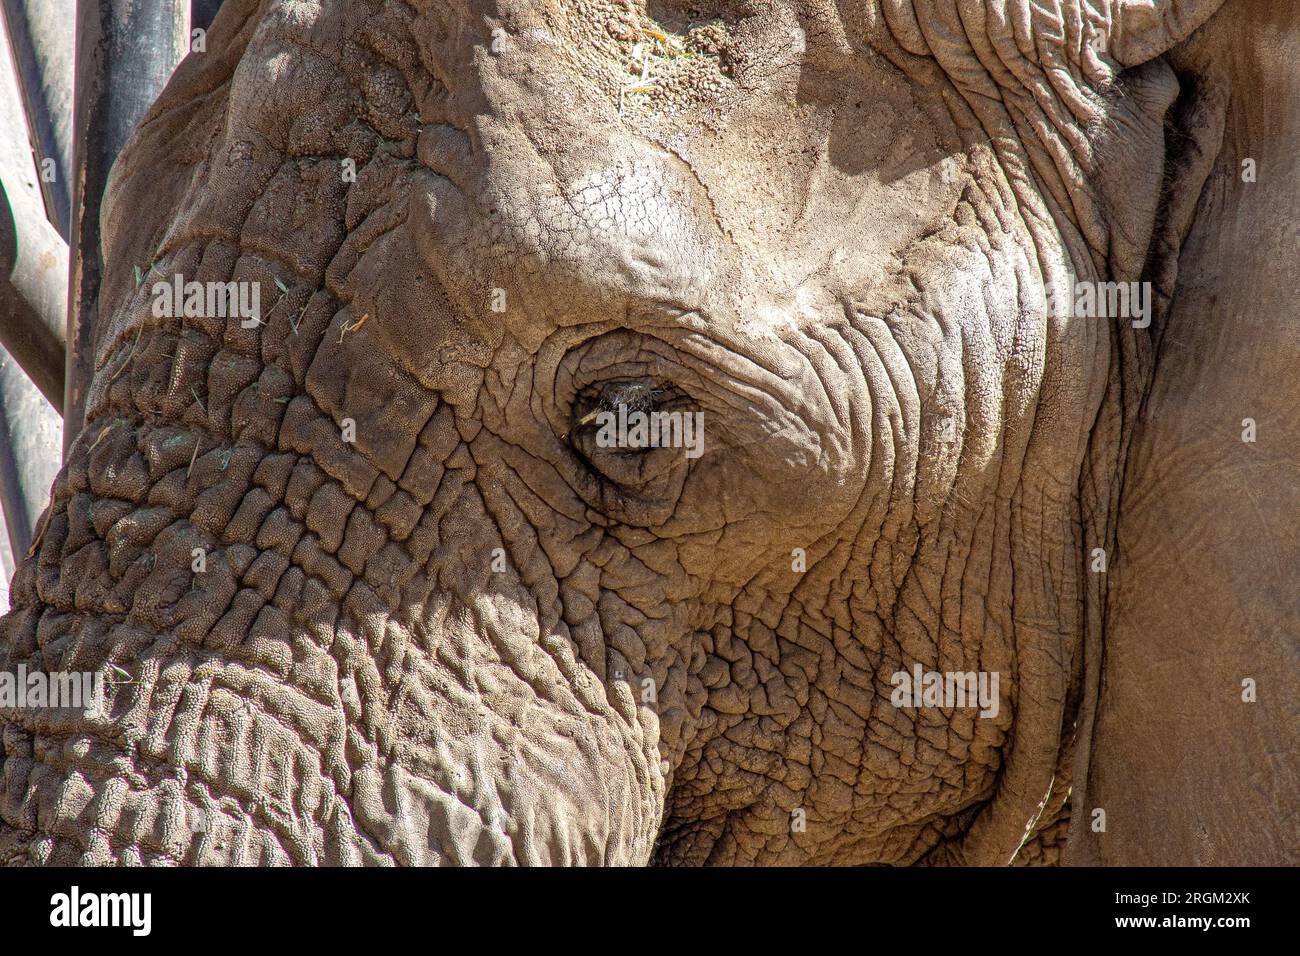 close up from a majestic elephant head Stock Photo